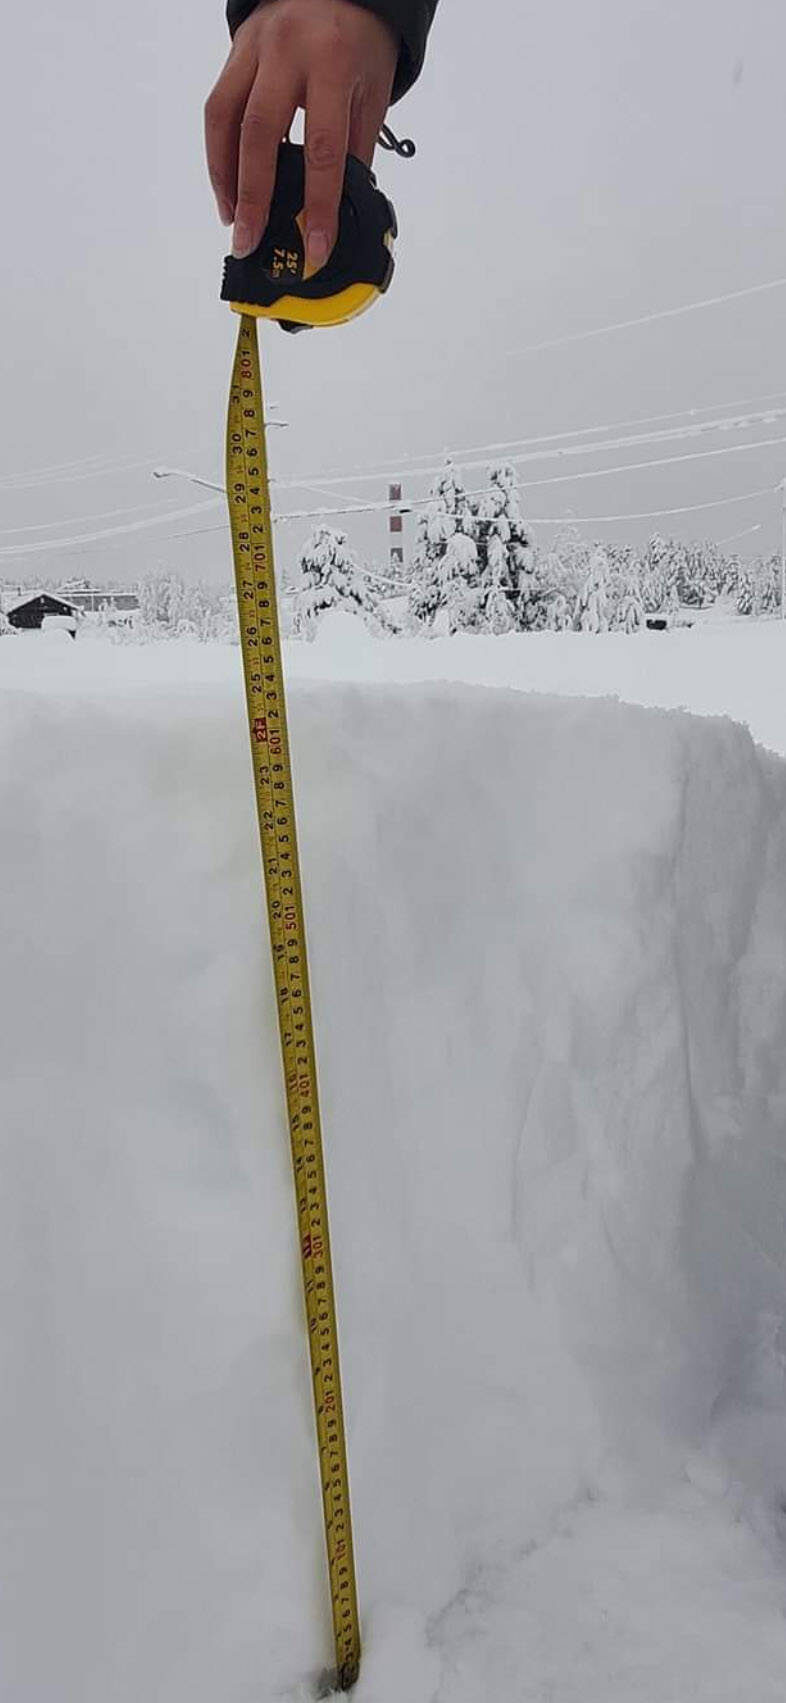 A member of Ulkatcho First Nation measures the snow on Friday, Nov. 27, 2020 showing that more than 60 cms of snow has fallen since a snowfall warning went into effect for northern portions of the Chilcotin on Thursday